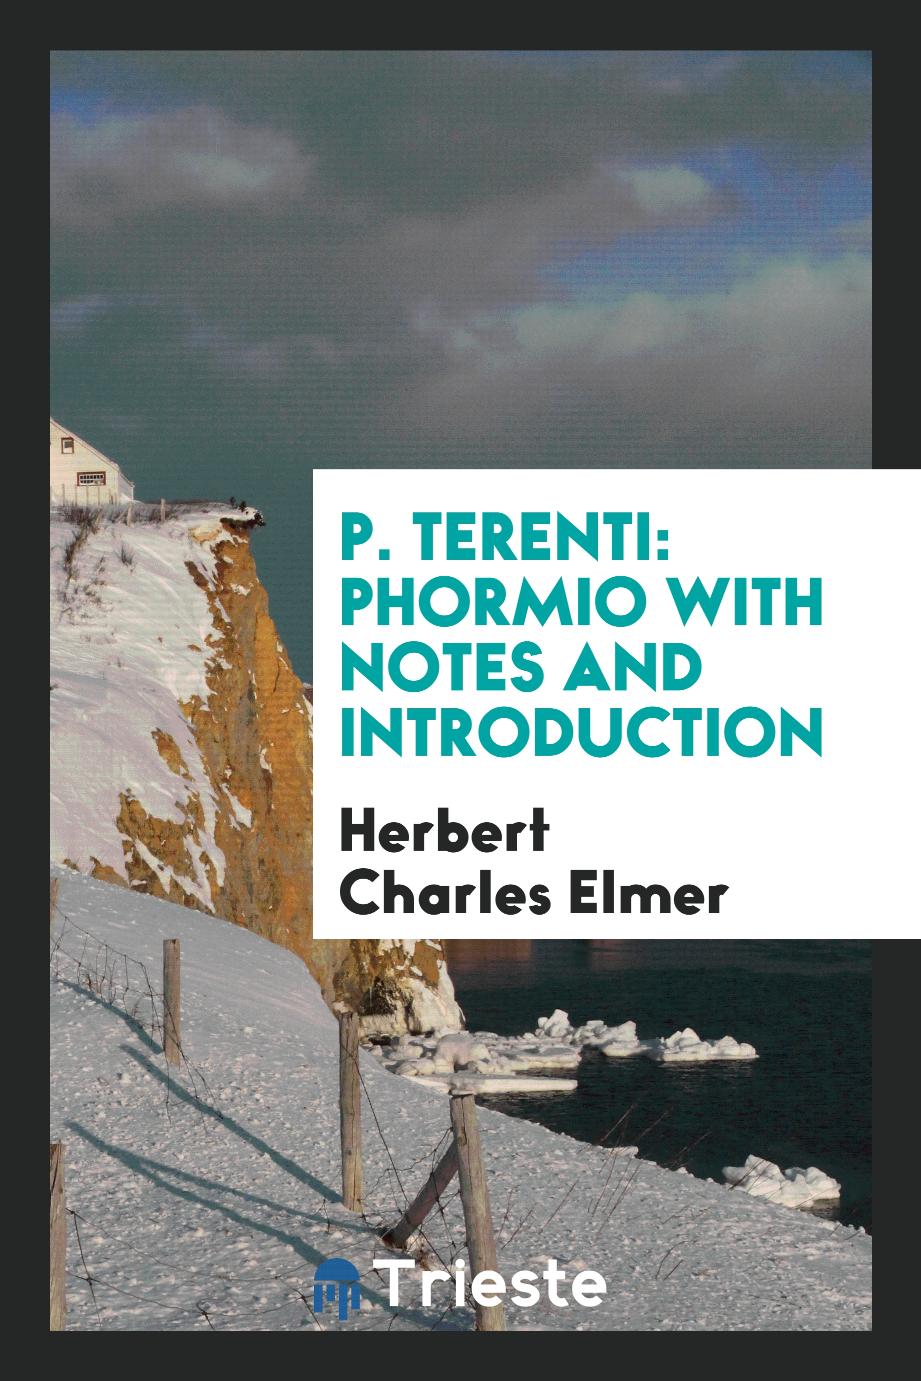 P. Terenti: Phormio with notes and introduction